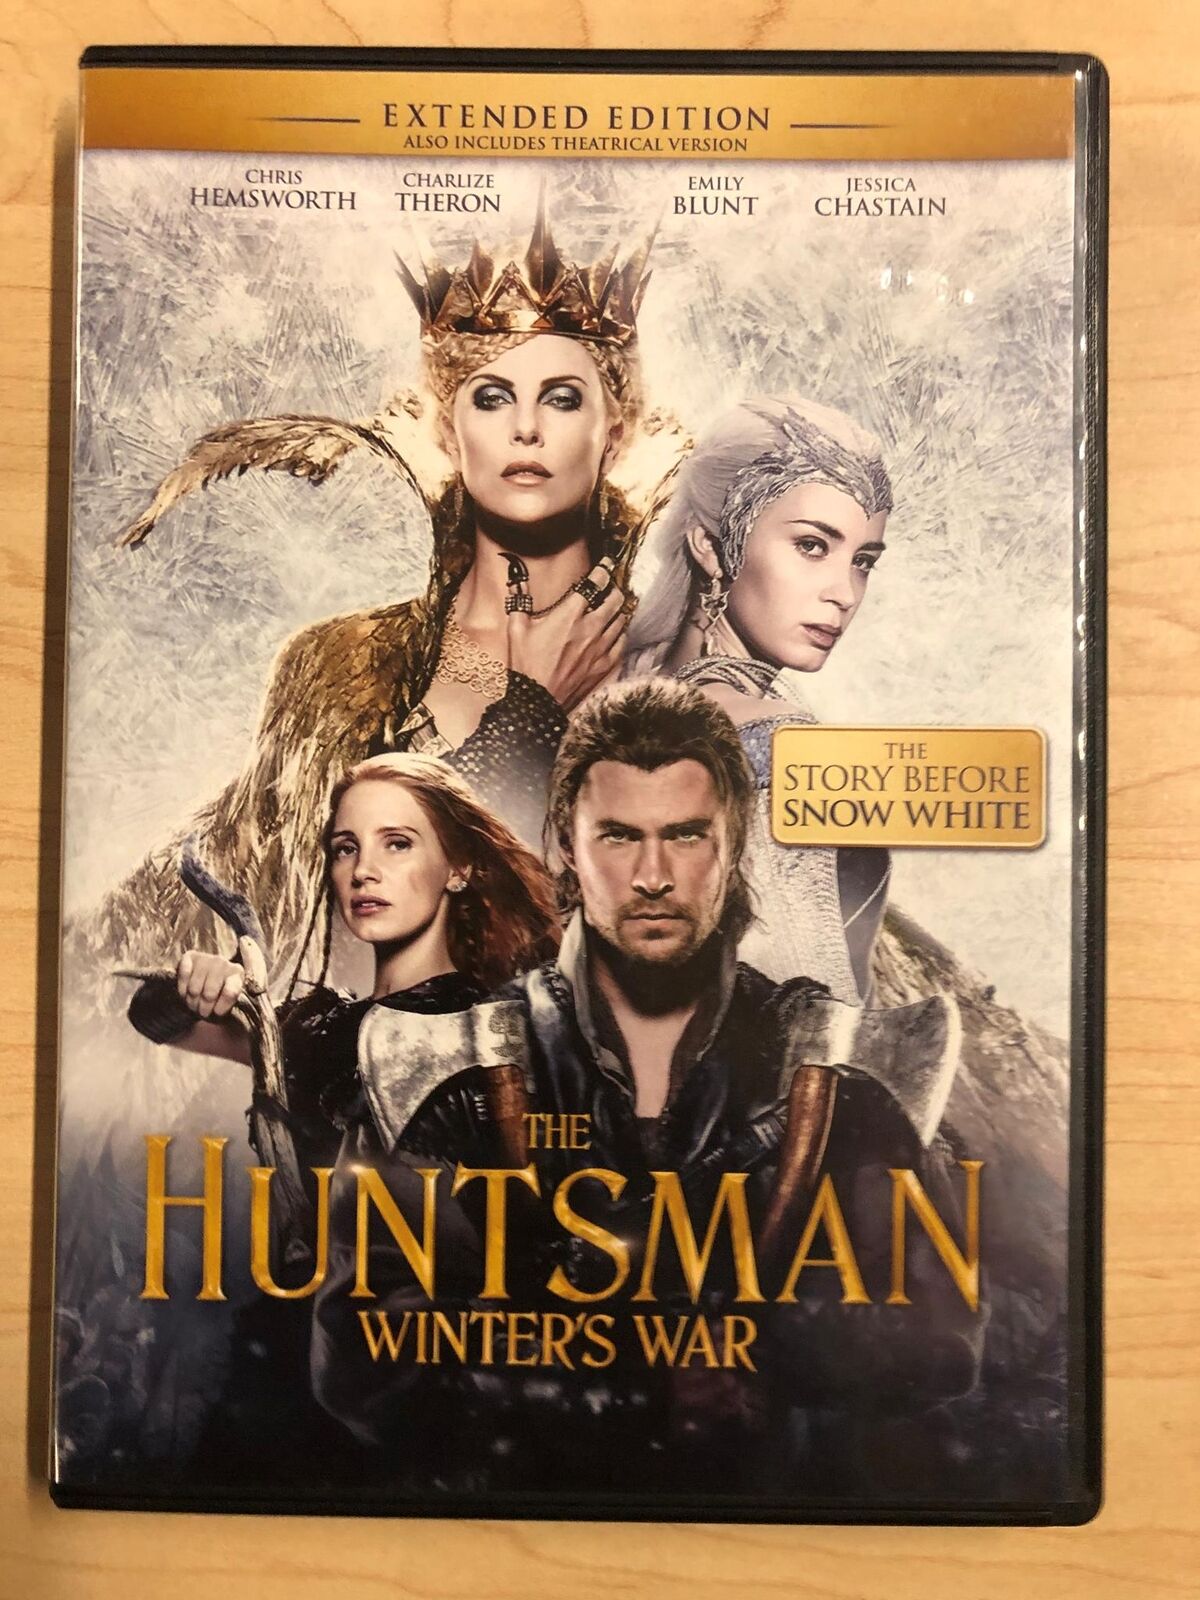 The Huntsman Winters War (DVD, Extended Edition, 2016) - J0806